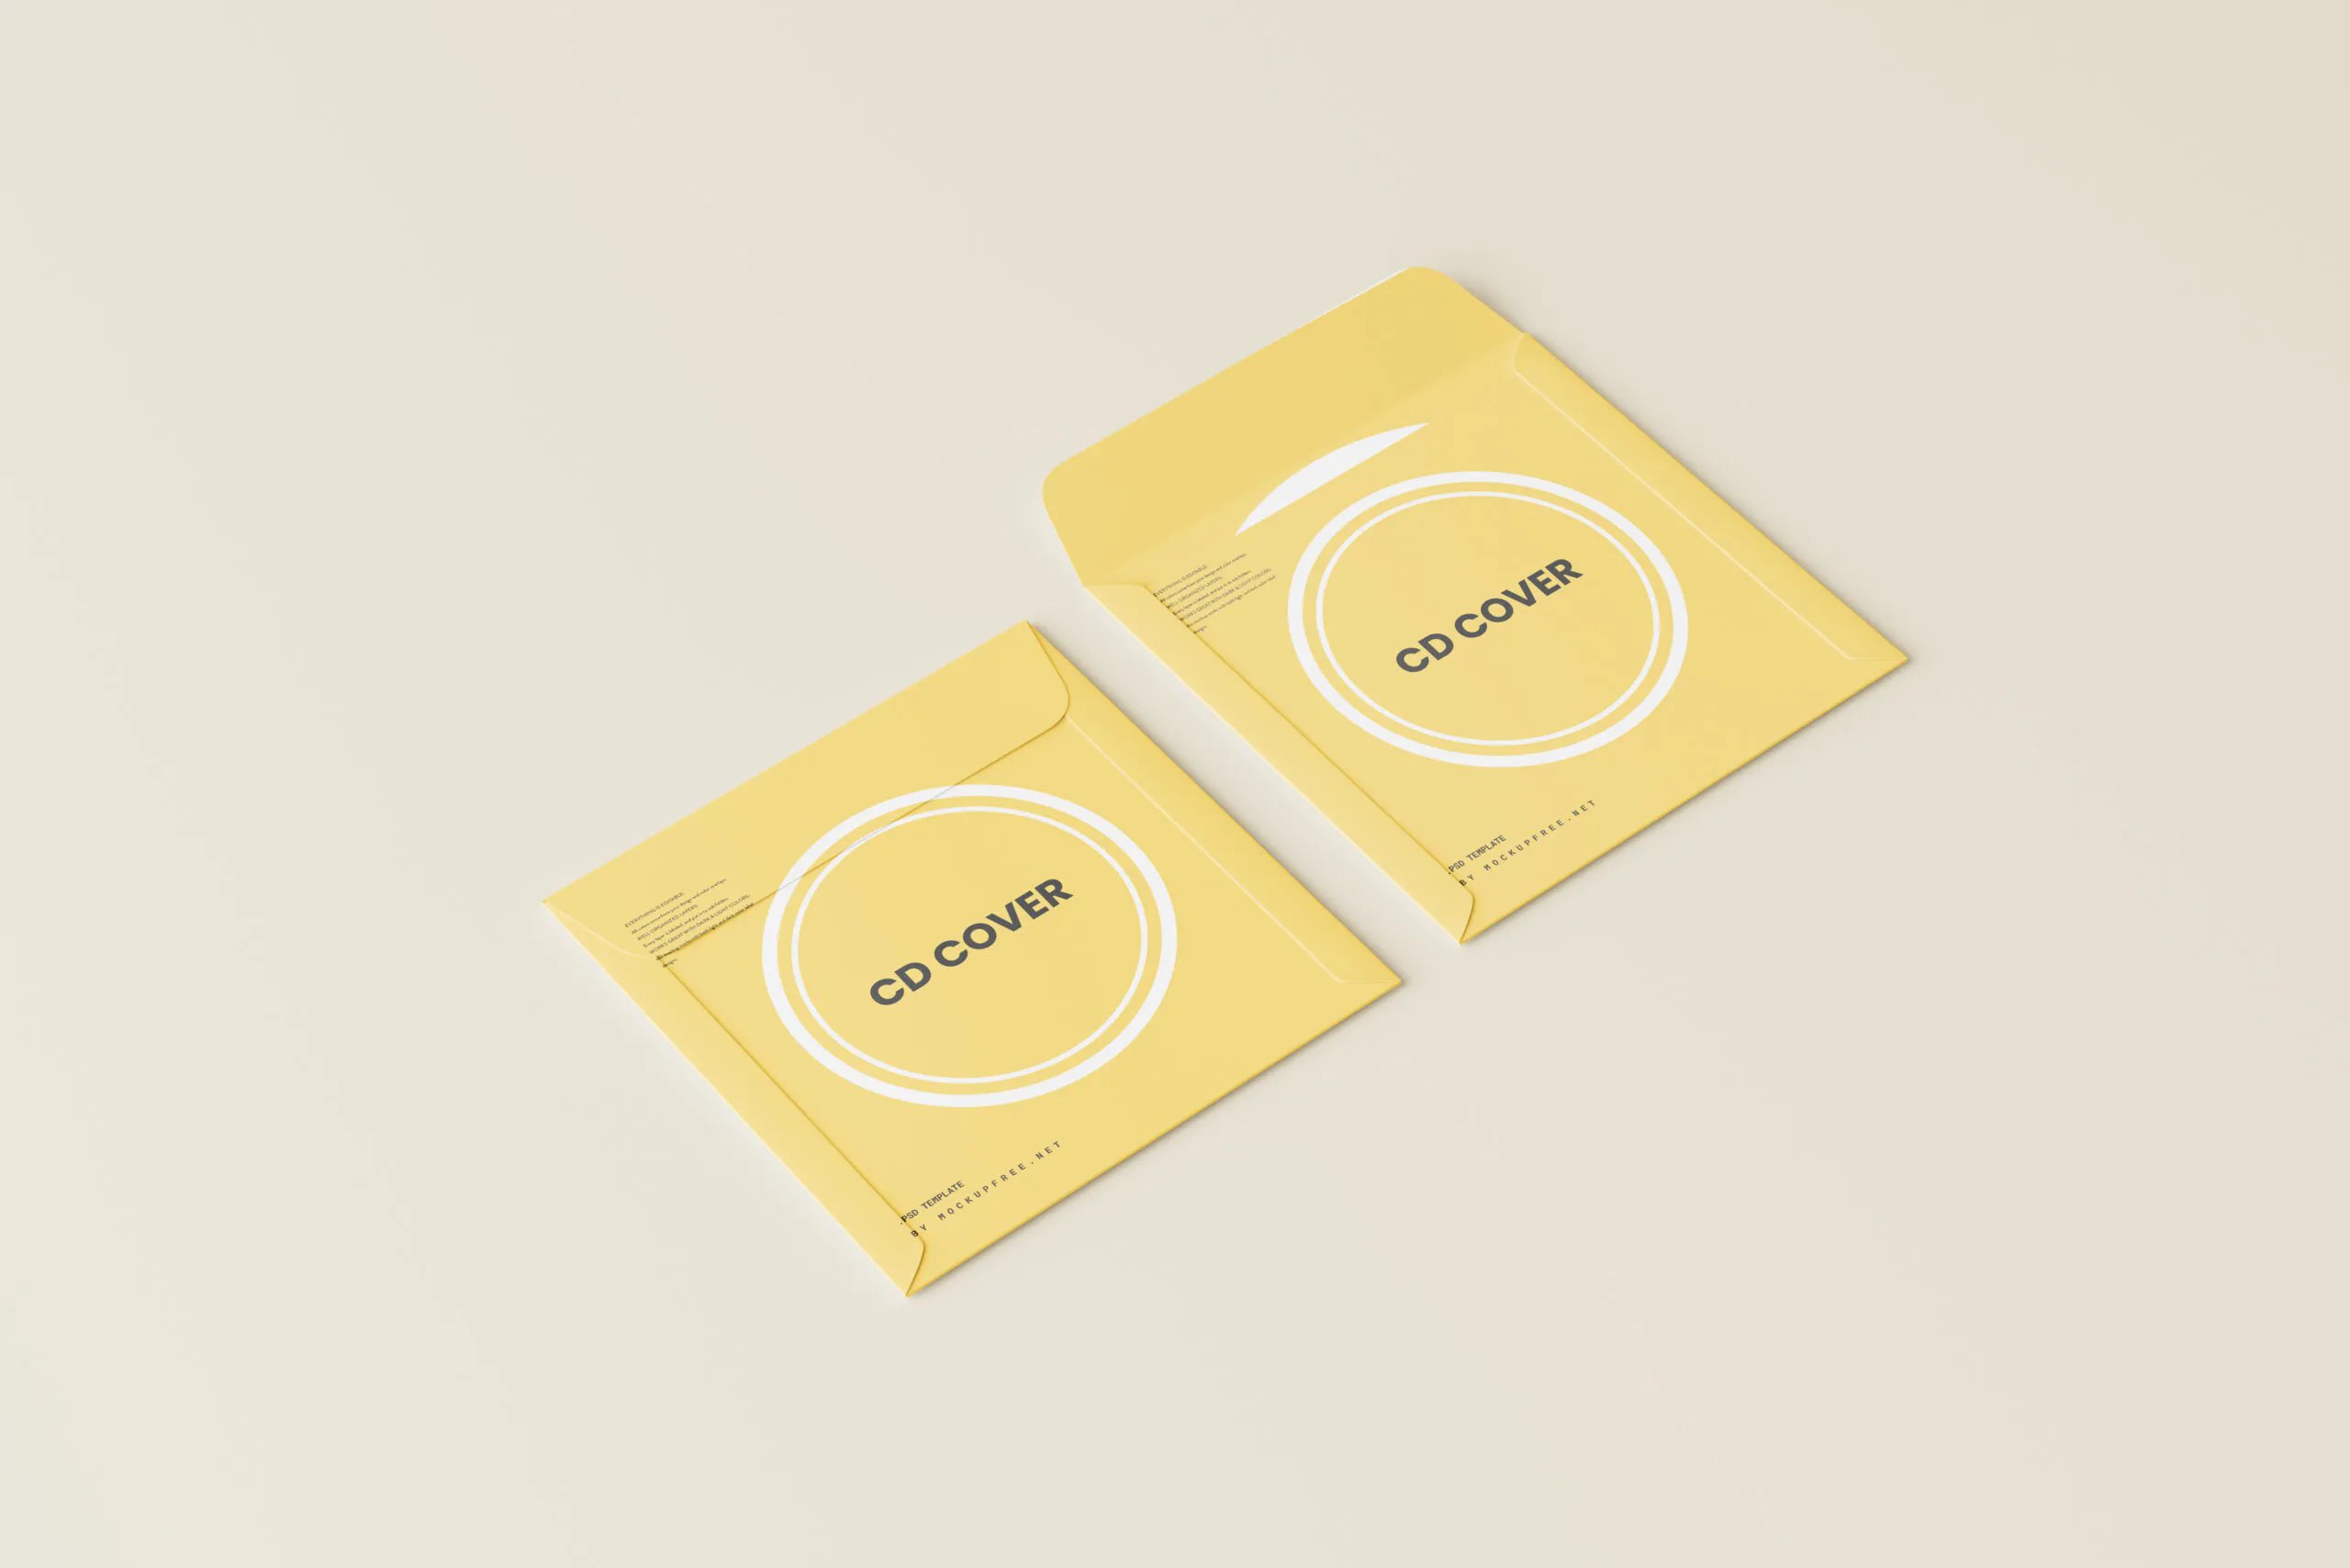 5 Paper CD Cover and Disc Mockups in Different Visions FREE PSD